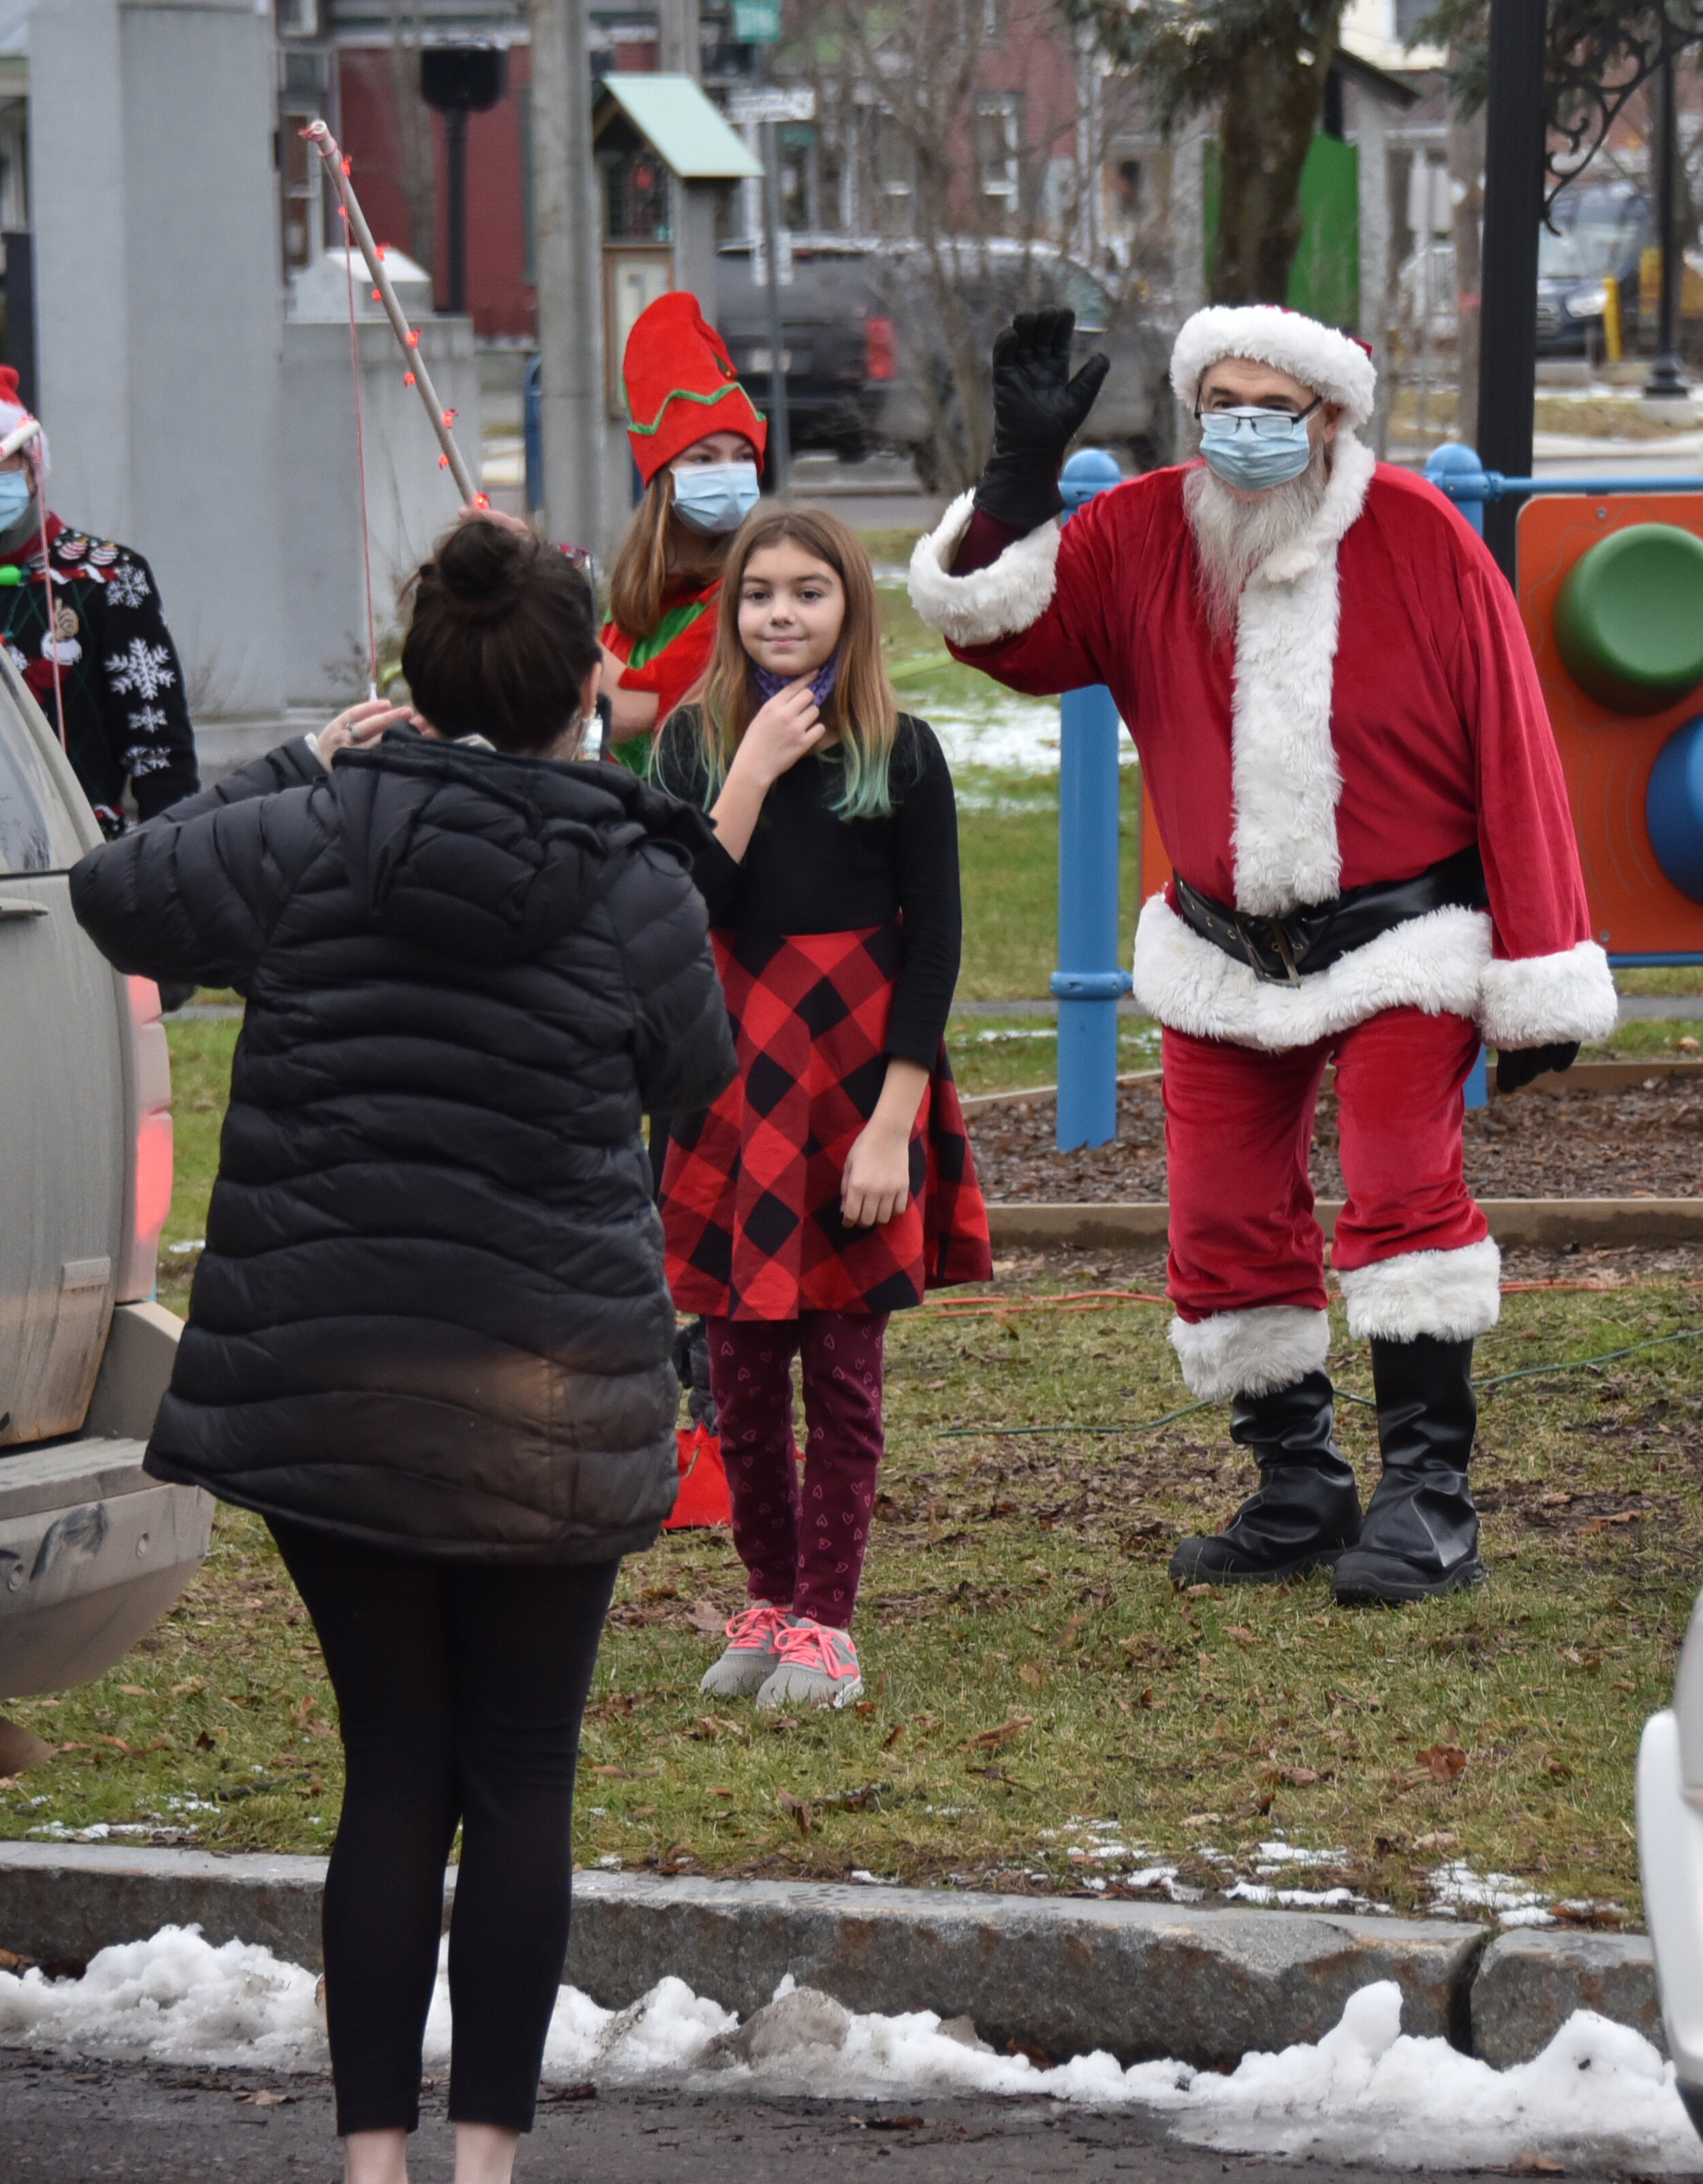   Quick hop out of the car for a photo with Santa at a distance. Photo by Gordon Miller.  